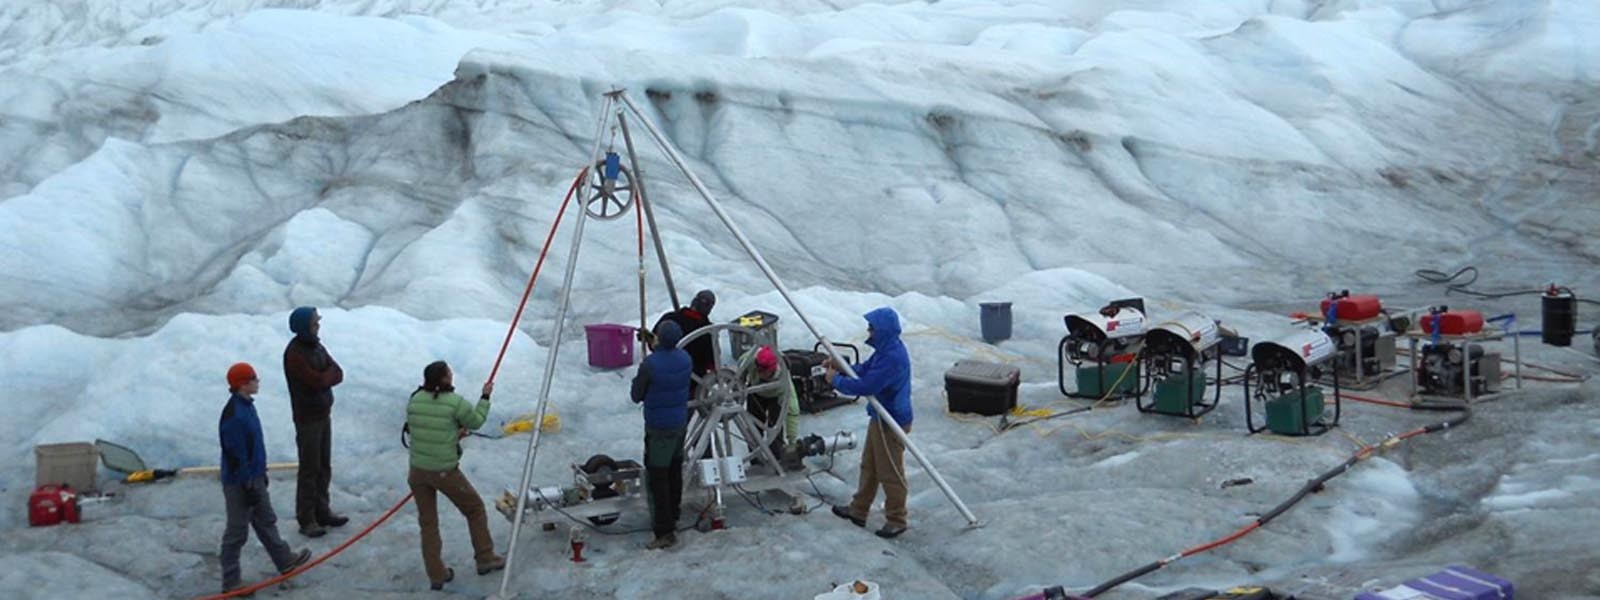 Working in the ice-fields of Greenland : GAP (Greenland Analogue Project) View More